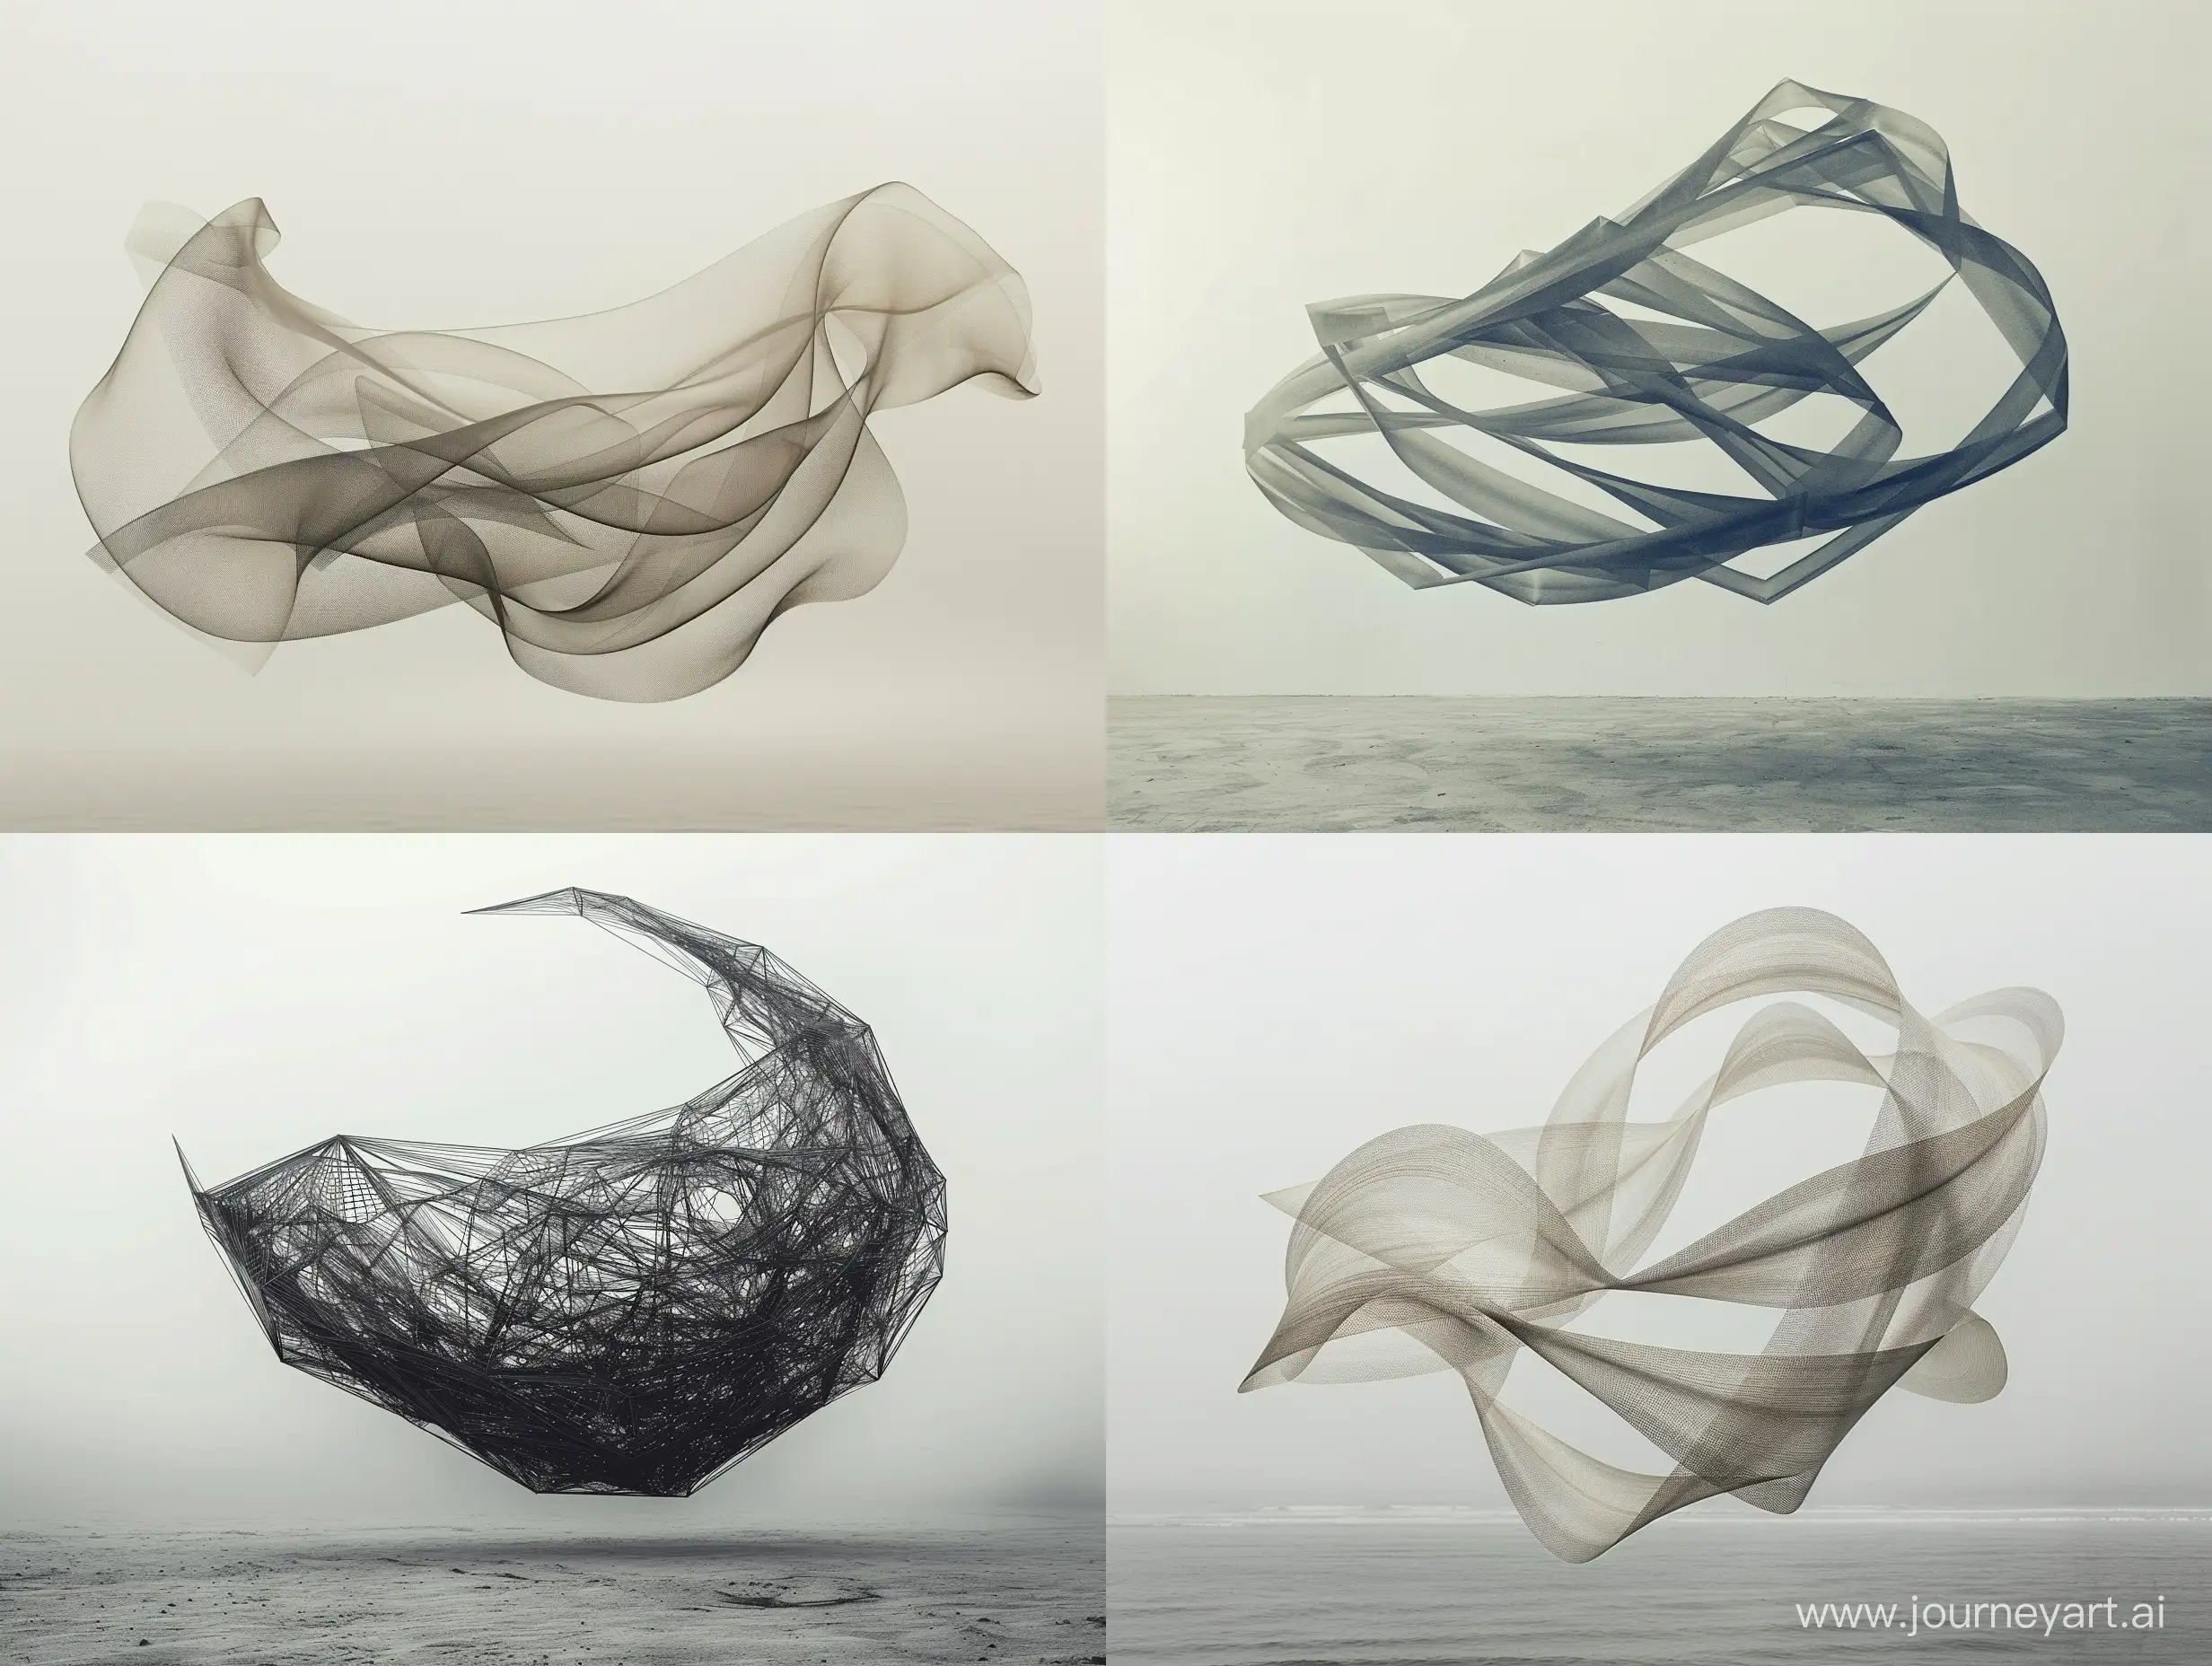 A Photograph capturing a surreal floating sculpture made of intersecting lines in a monochromatic color scheme, defying gravity with serene grace.
